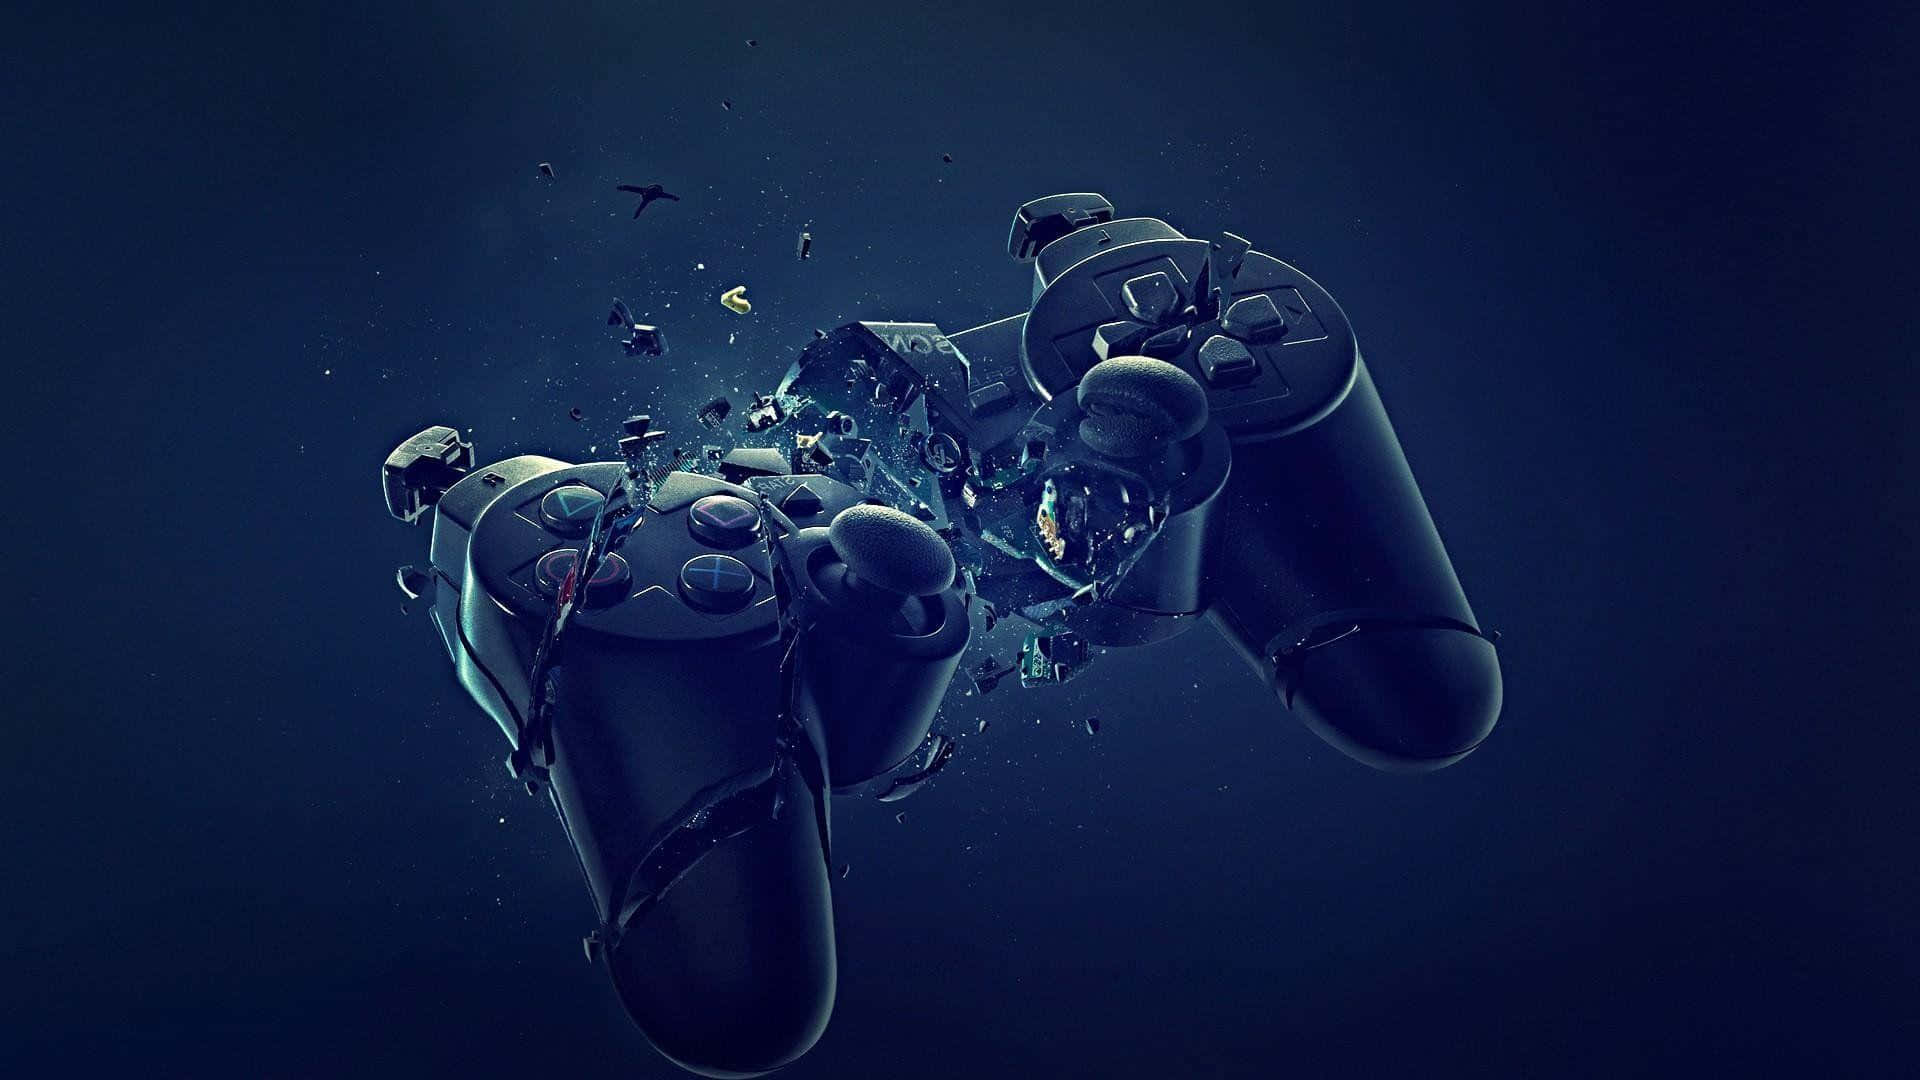 Download Enjoy an amazing gaming experience on Playstation 4 